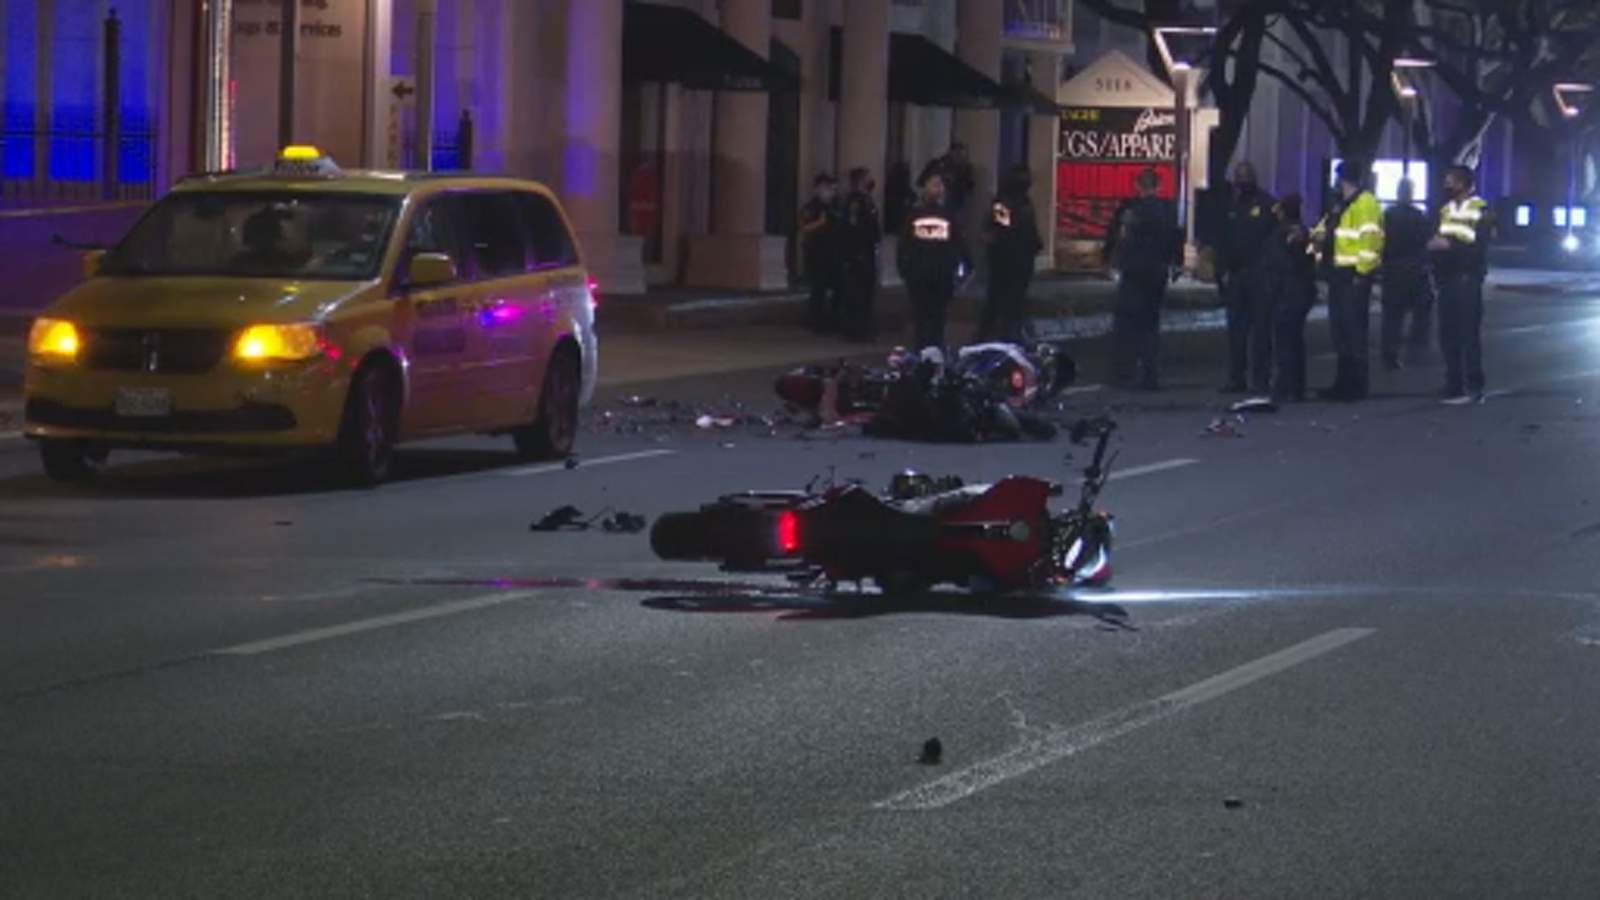 HPD: 1 person dead, 3 others injured in crash involving taxicab, motorcycles